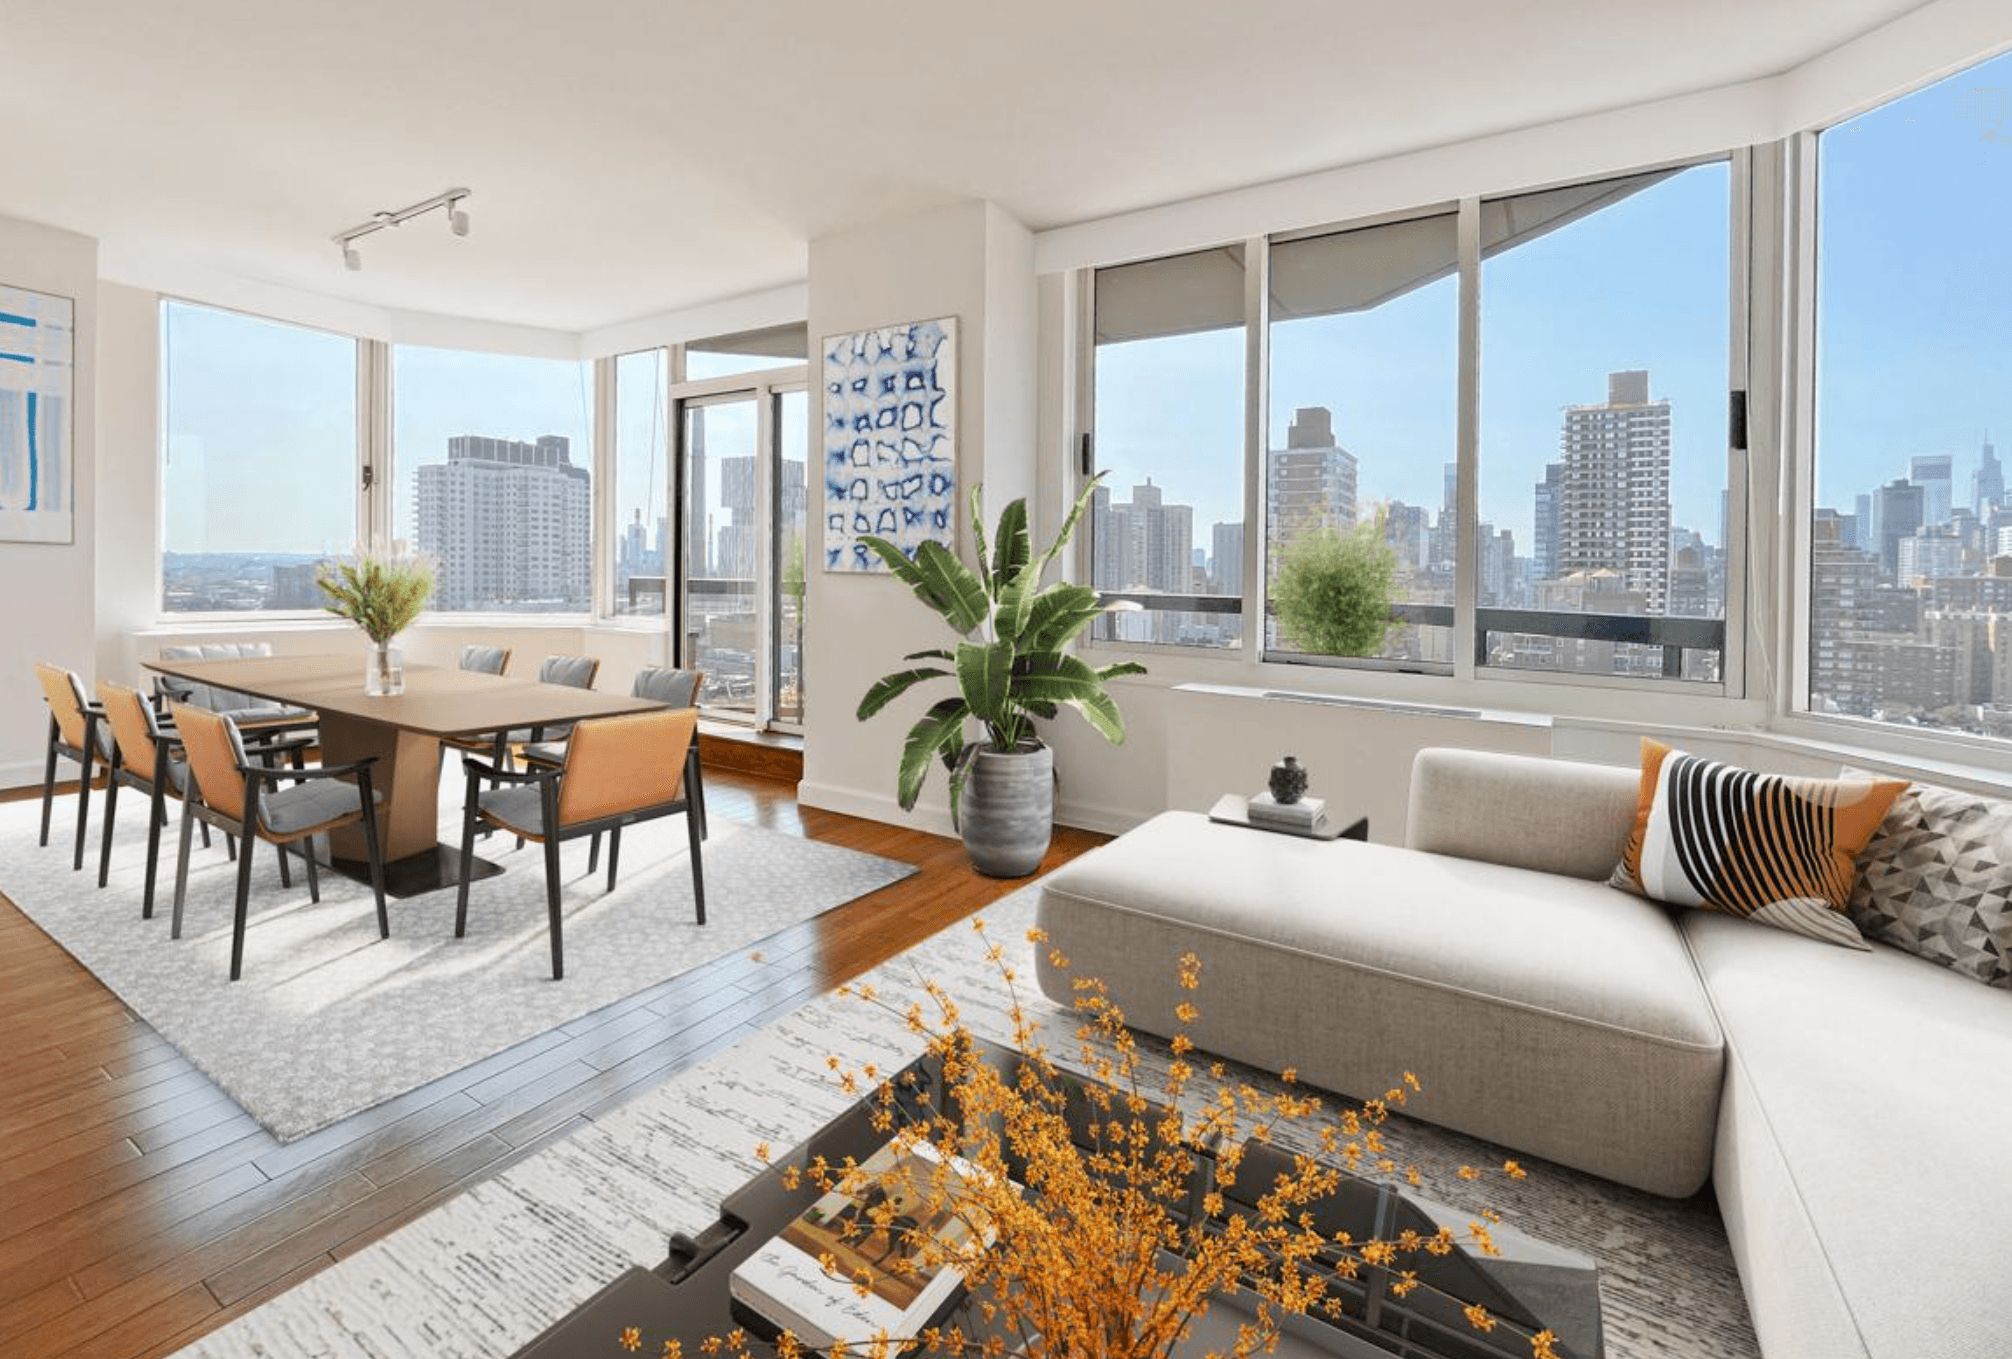 LARGE 3 BR/2BA IN THE UPPER EAST SIDE